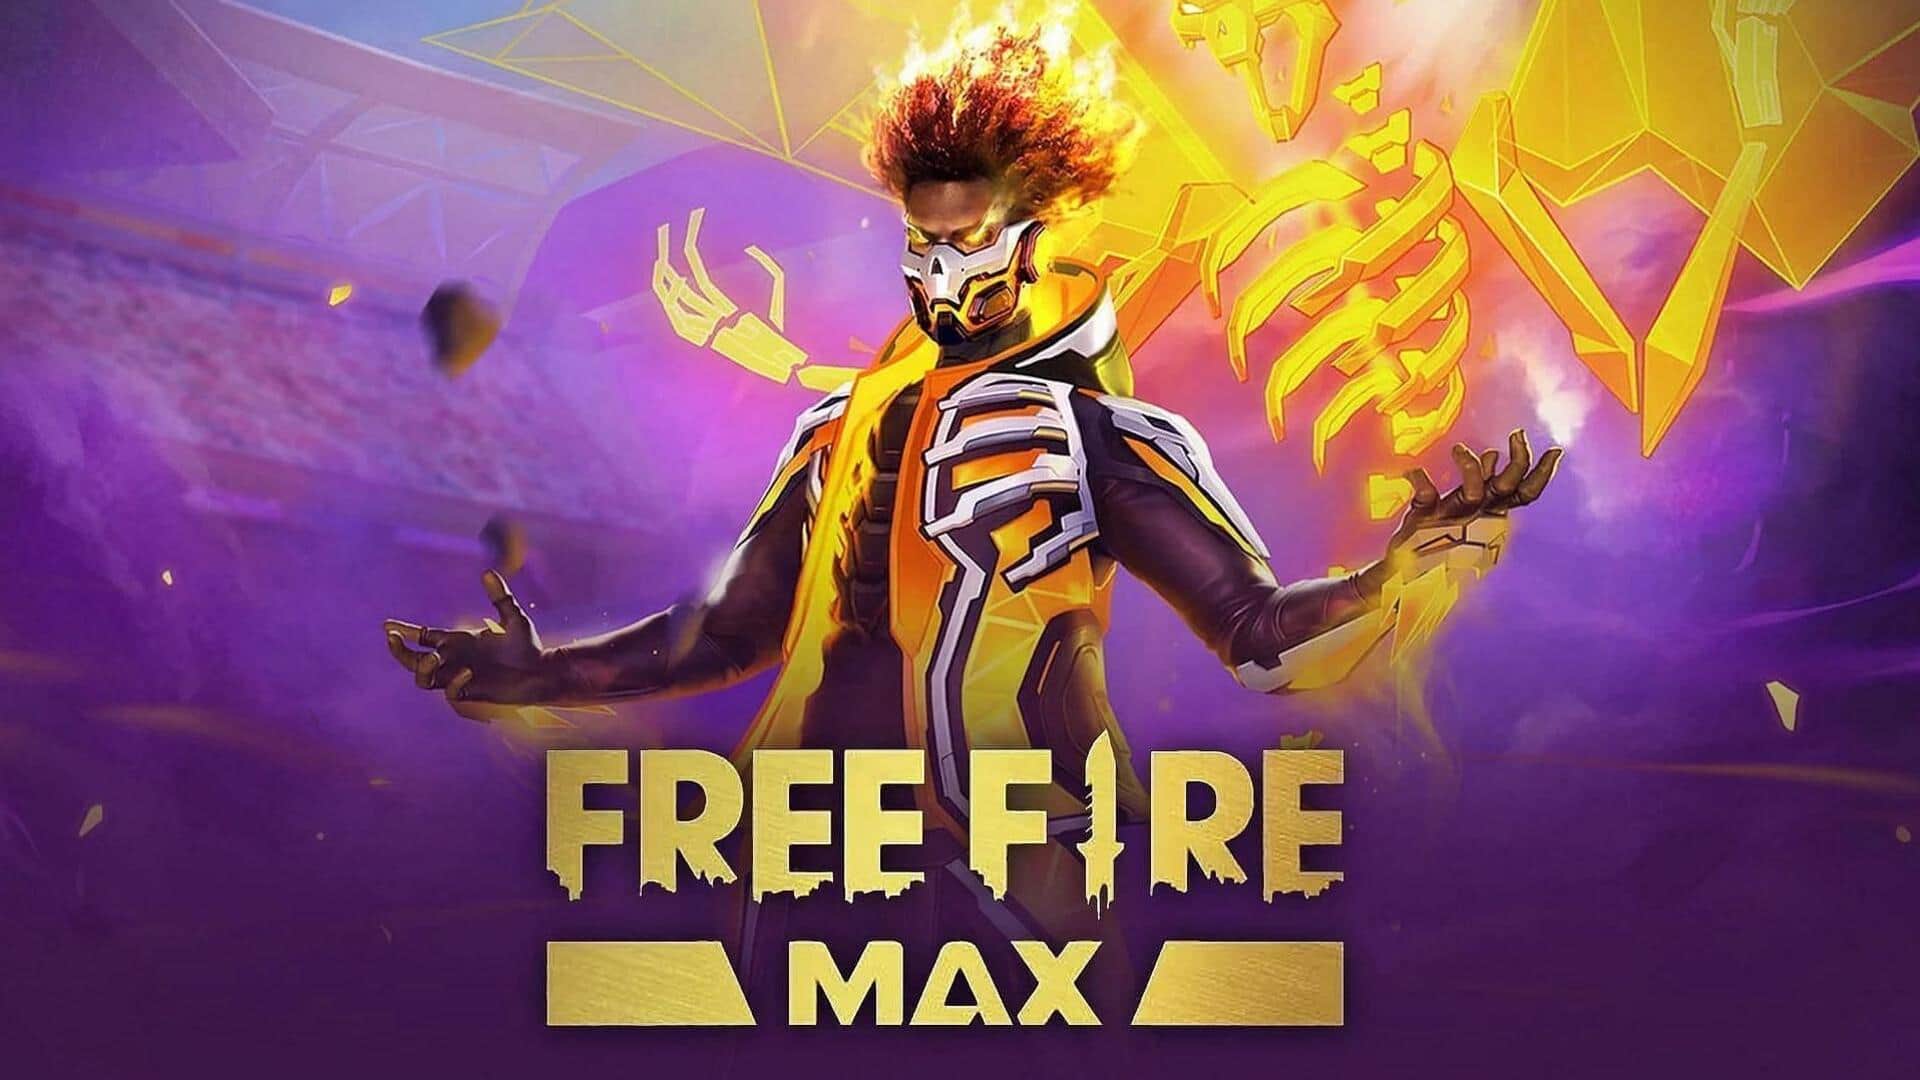 Garena Free Fire MAX's August 4 codes: How to redeem